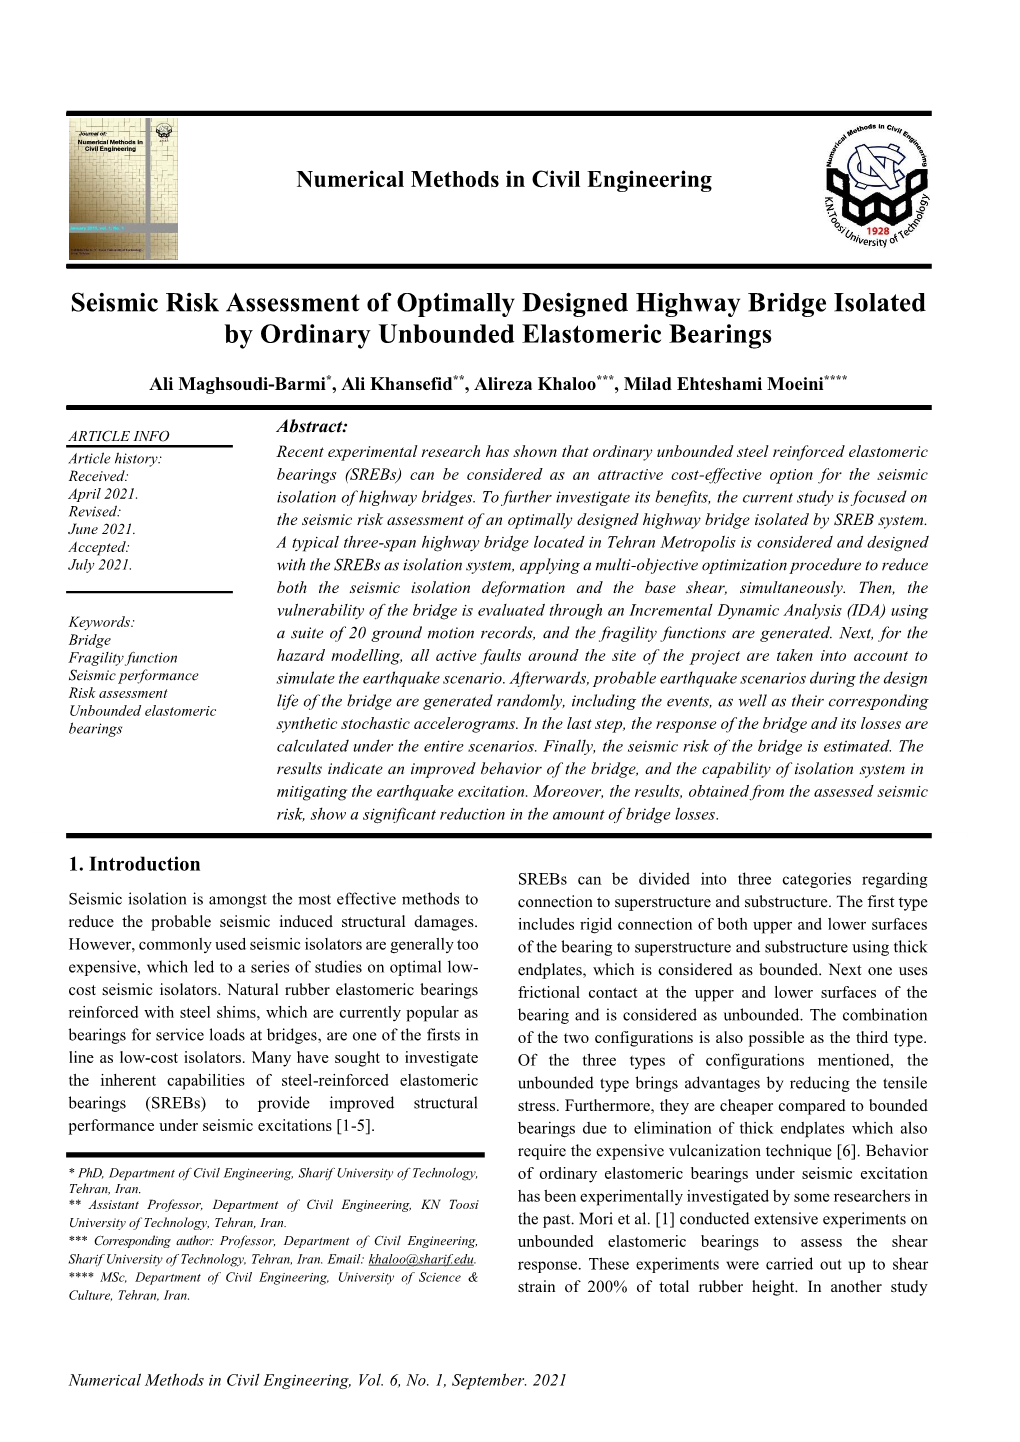 Seismic Risk Assessment of Optimally Designed Highway Bridge Isolated by Ordinary Unbounded Elastomeric Bearings